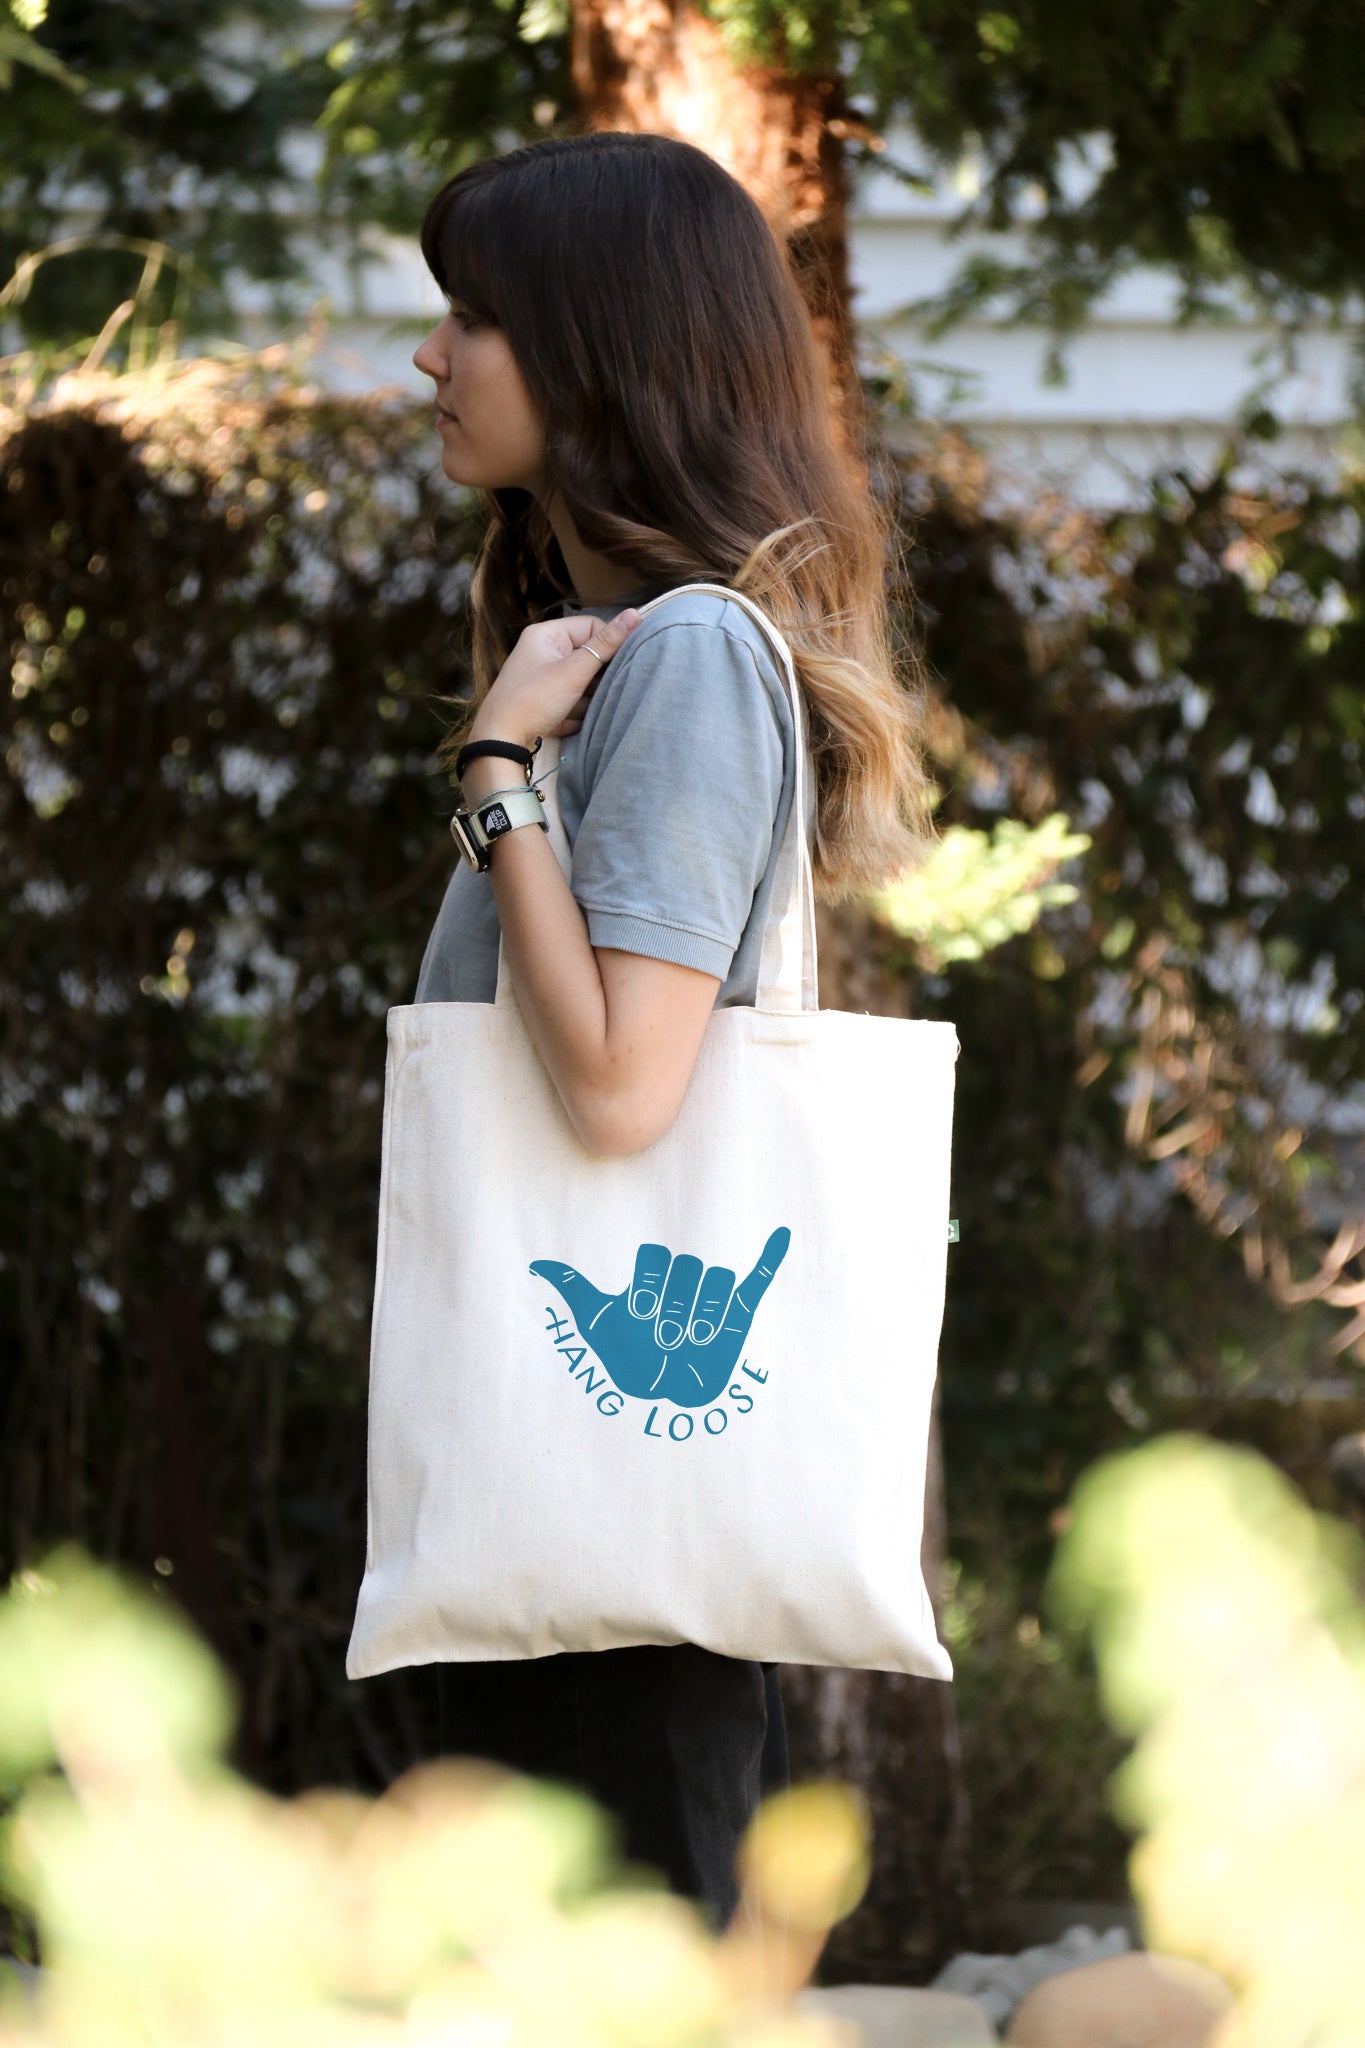 Hang Loose - Canvas Tote Bag - Recycled Cotton